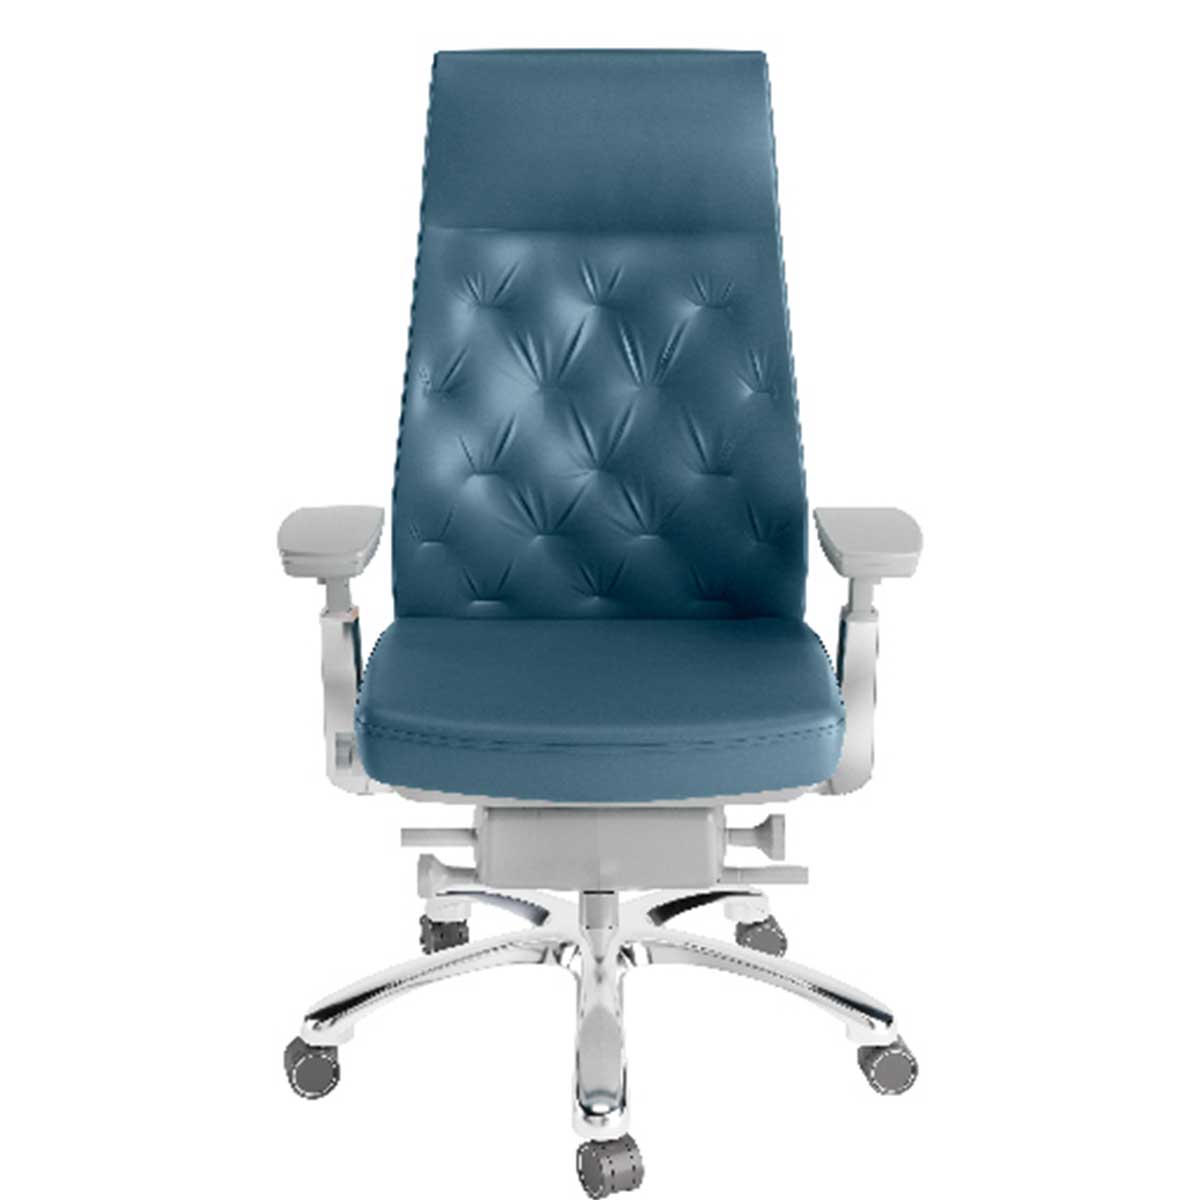 Boss Chair Manufacturers, Suppliers, Exporters in Delhi 